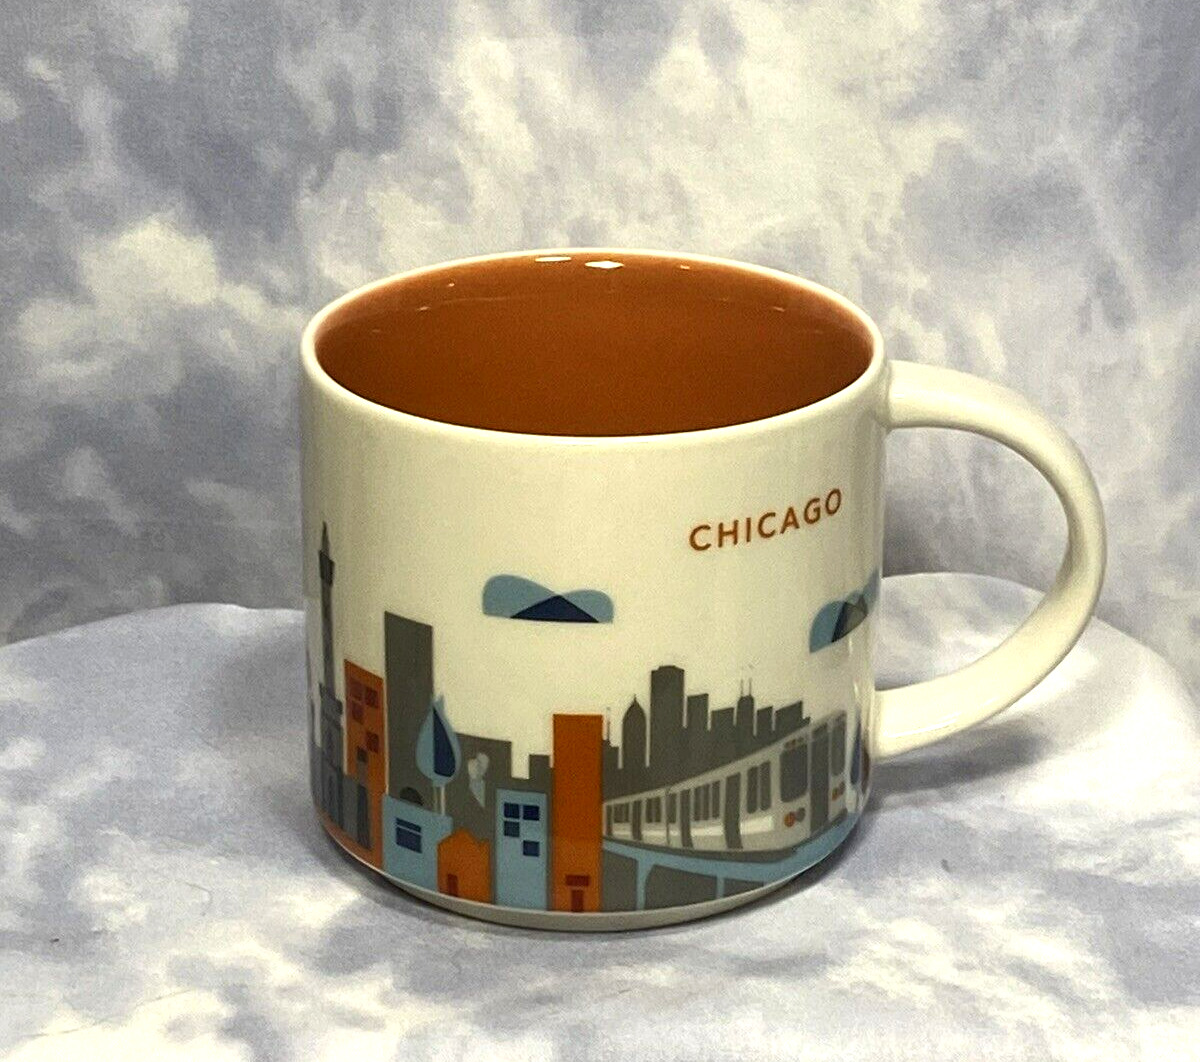 Starbuck 2017 CHICAGO 14 oz Coffee Mug Ceramic You Are Here Collection